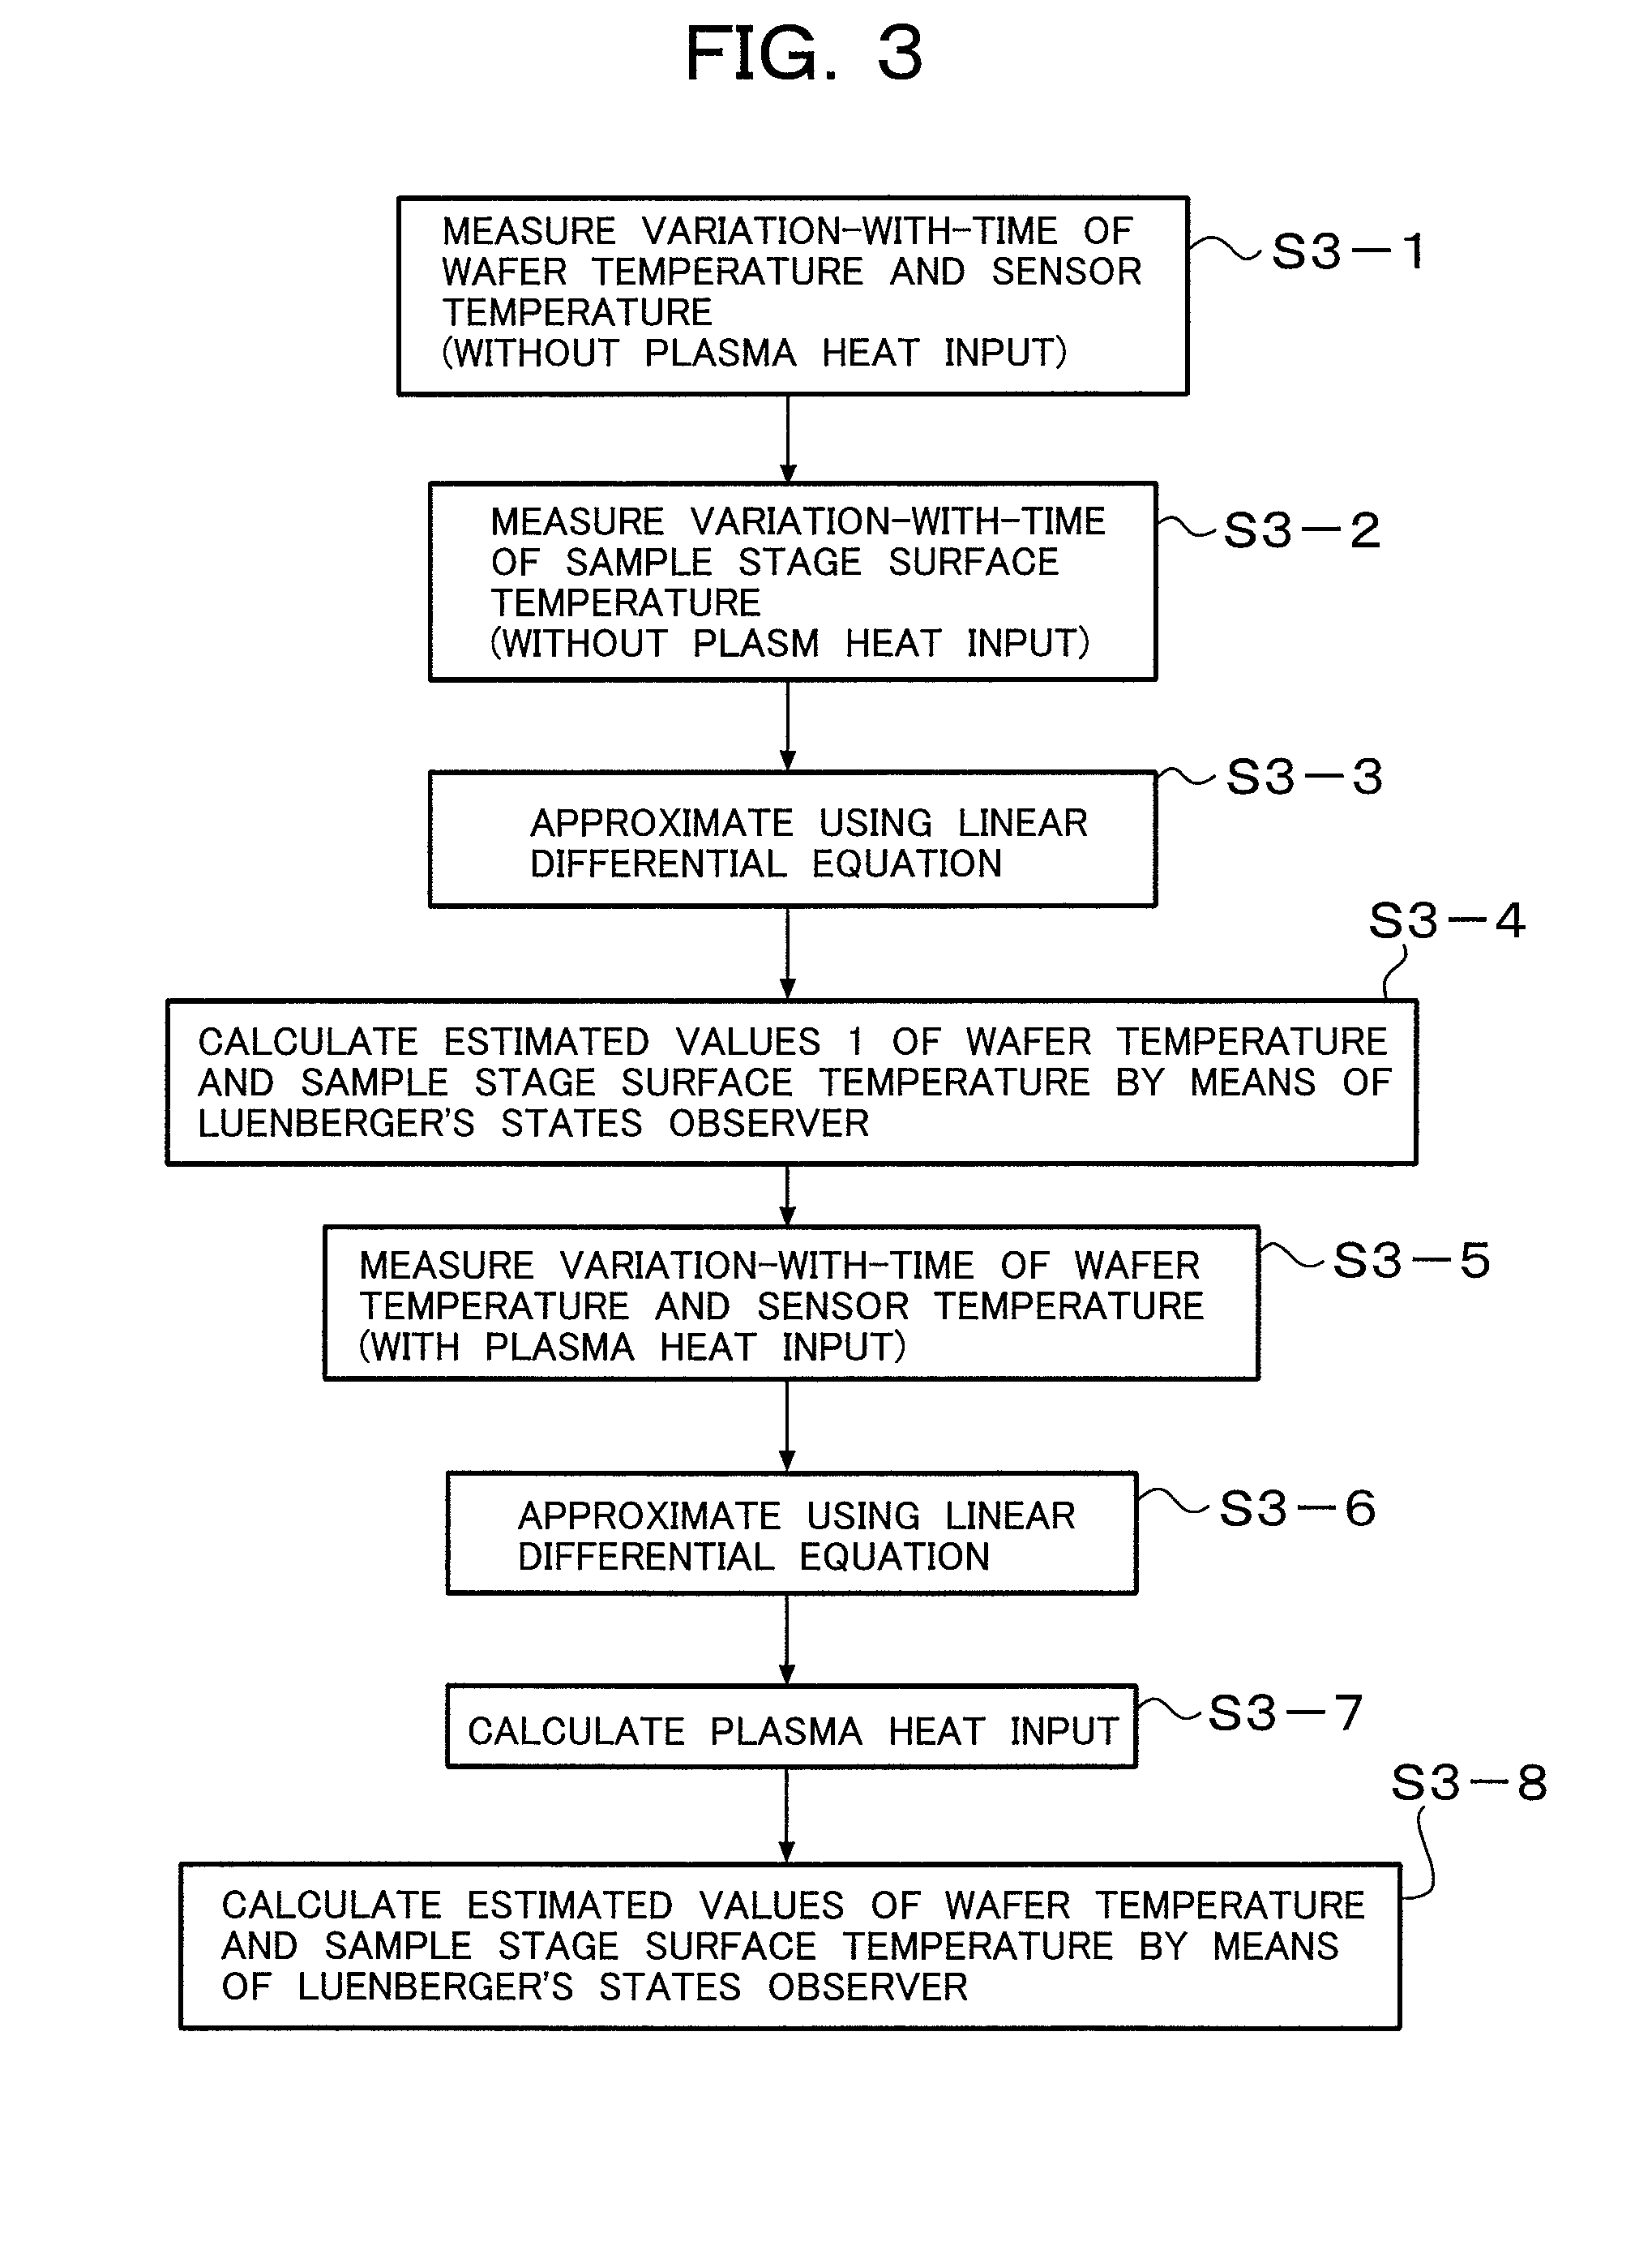 Control method of a temperature of a sample